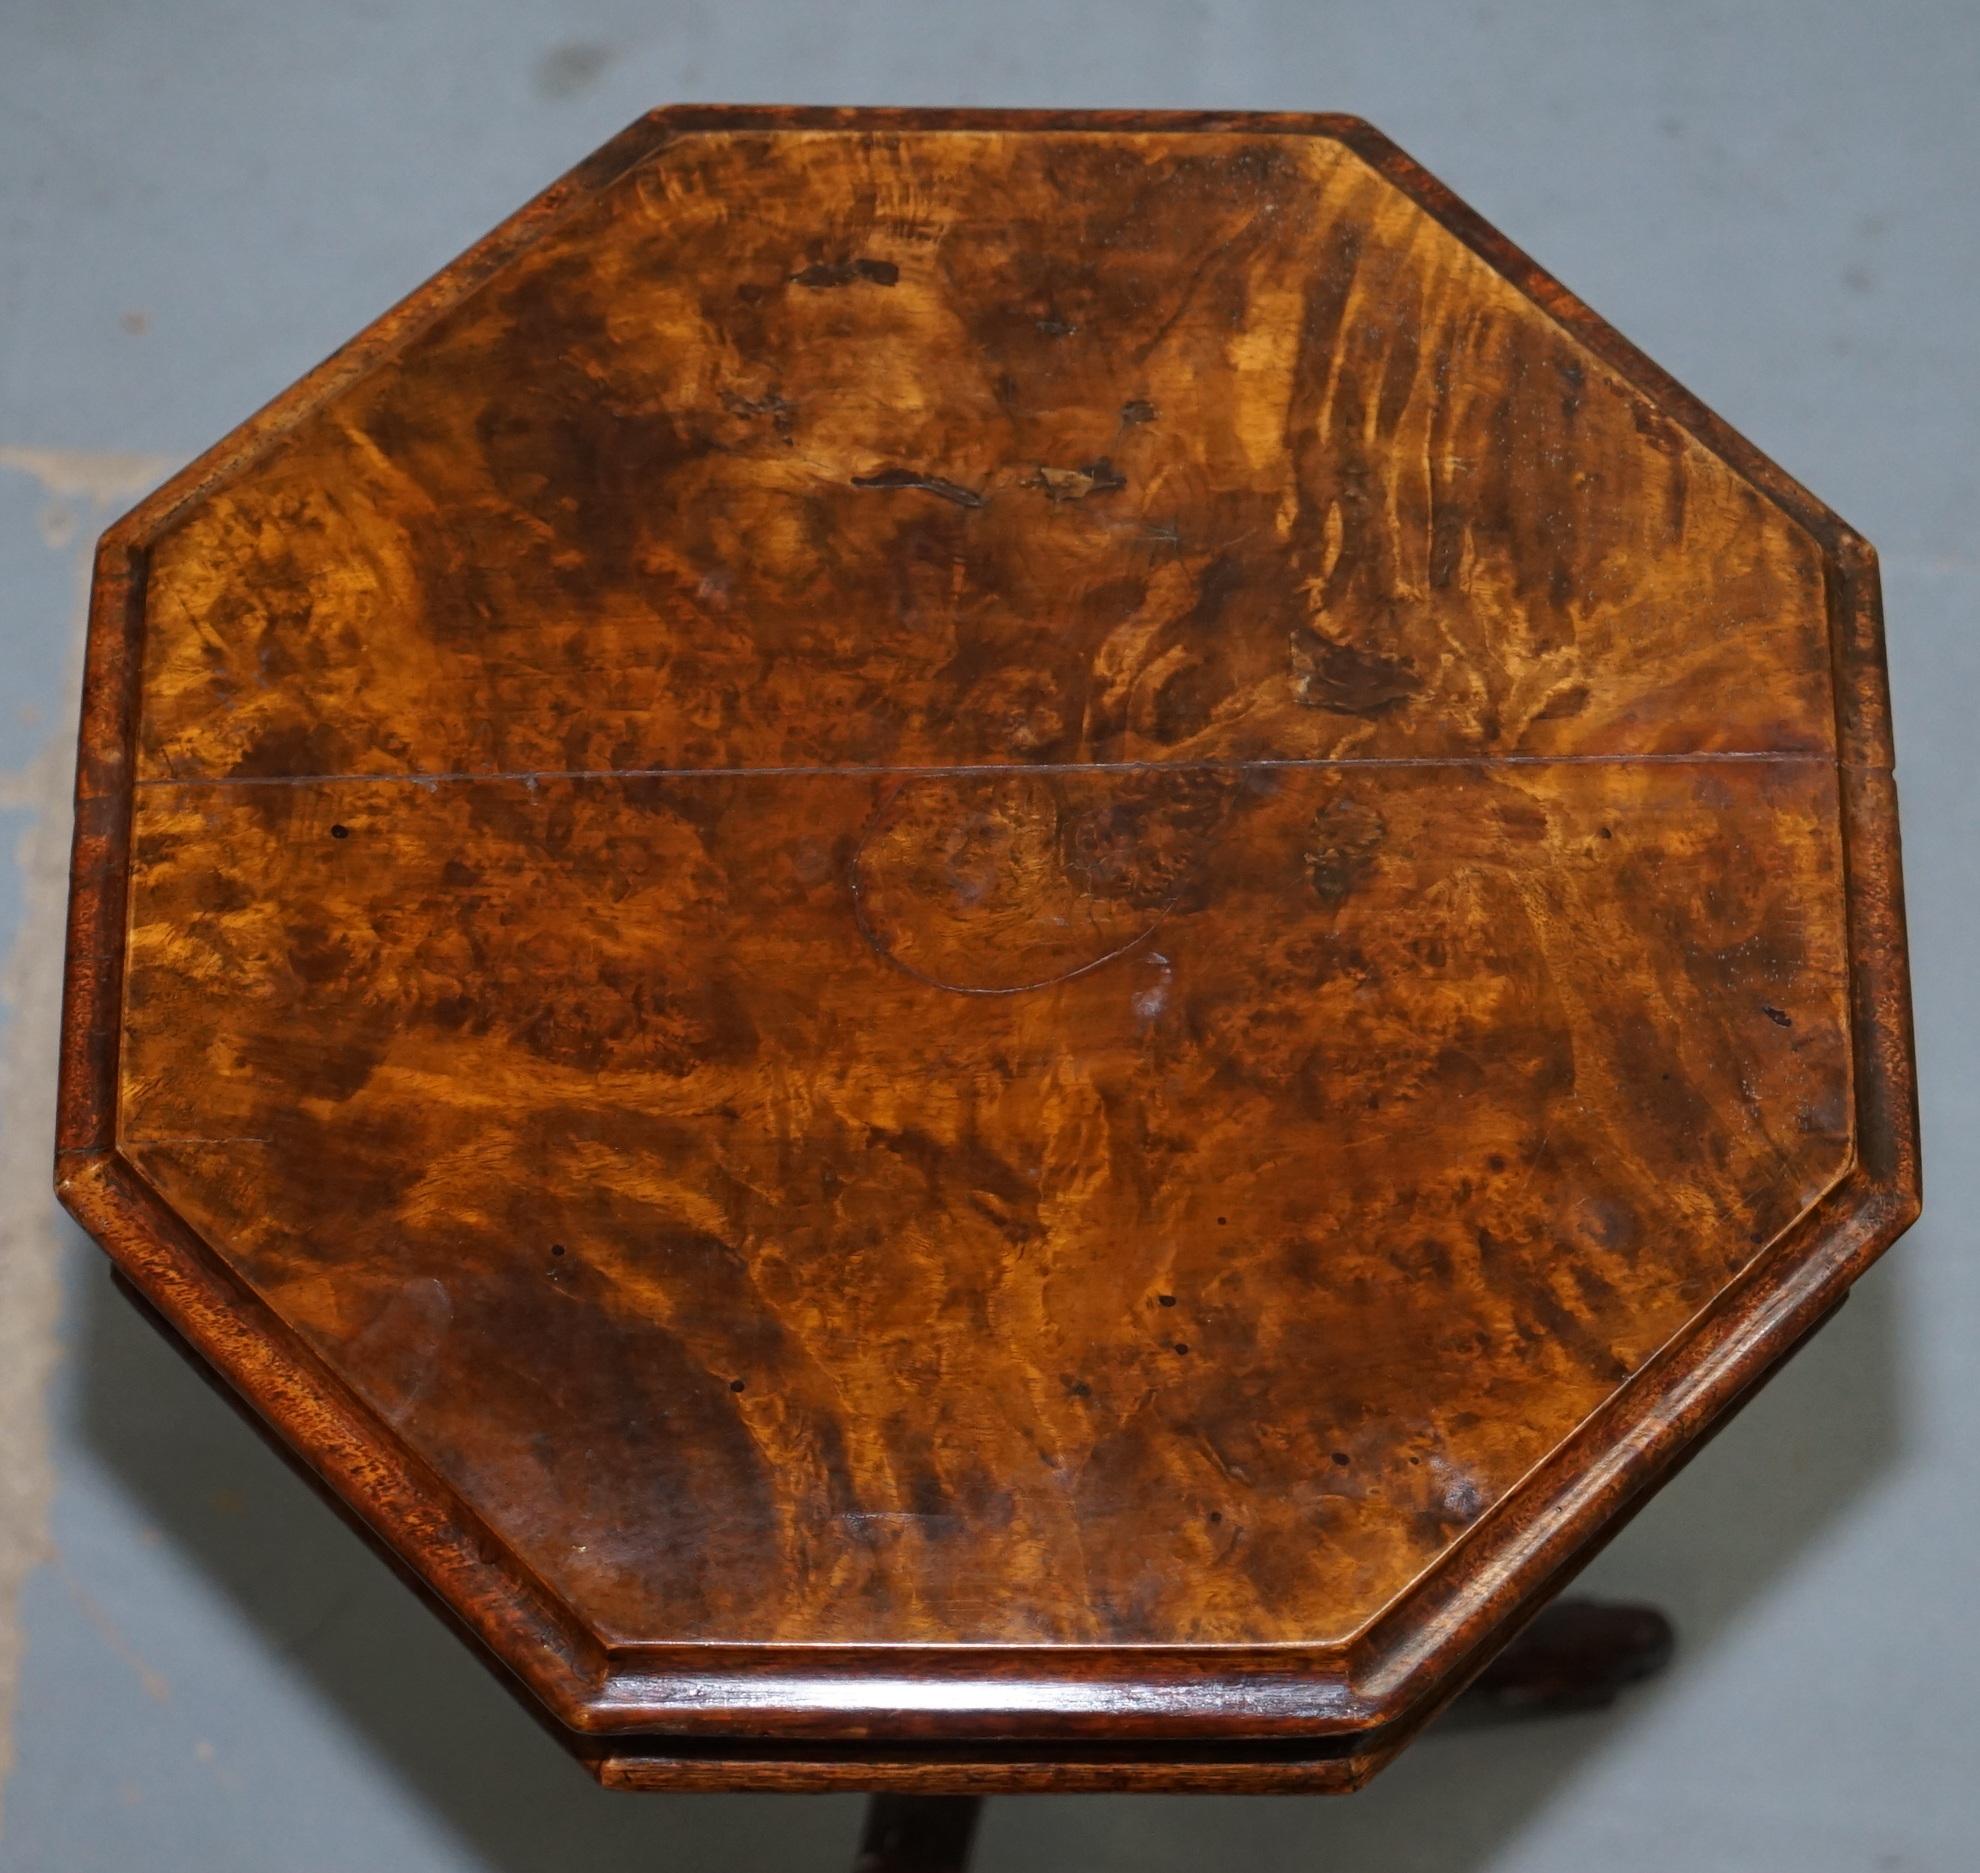 We are delighted to offer for sale this lovely hand made Victorian sewing or work box in burr walnut

A very good looking and well made piece, the octagonal top is feature, usually these have much simpler formations, the burr walnut is nicely cur